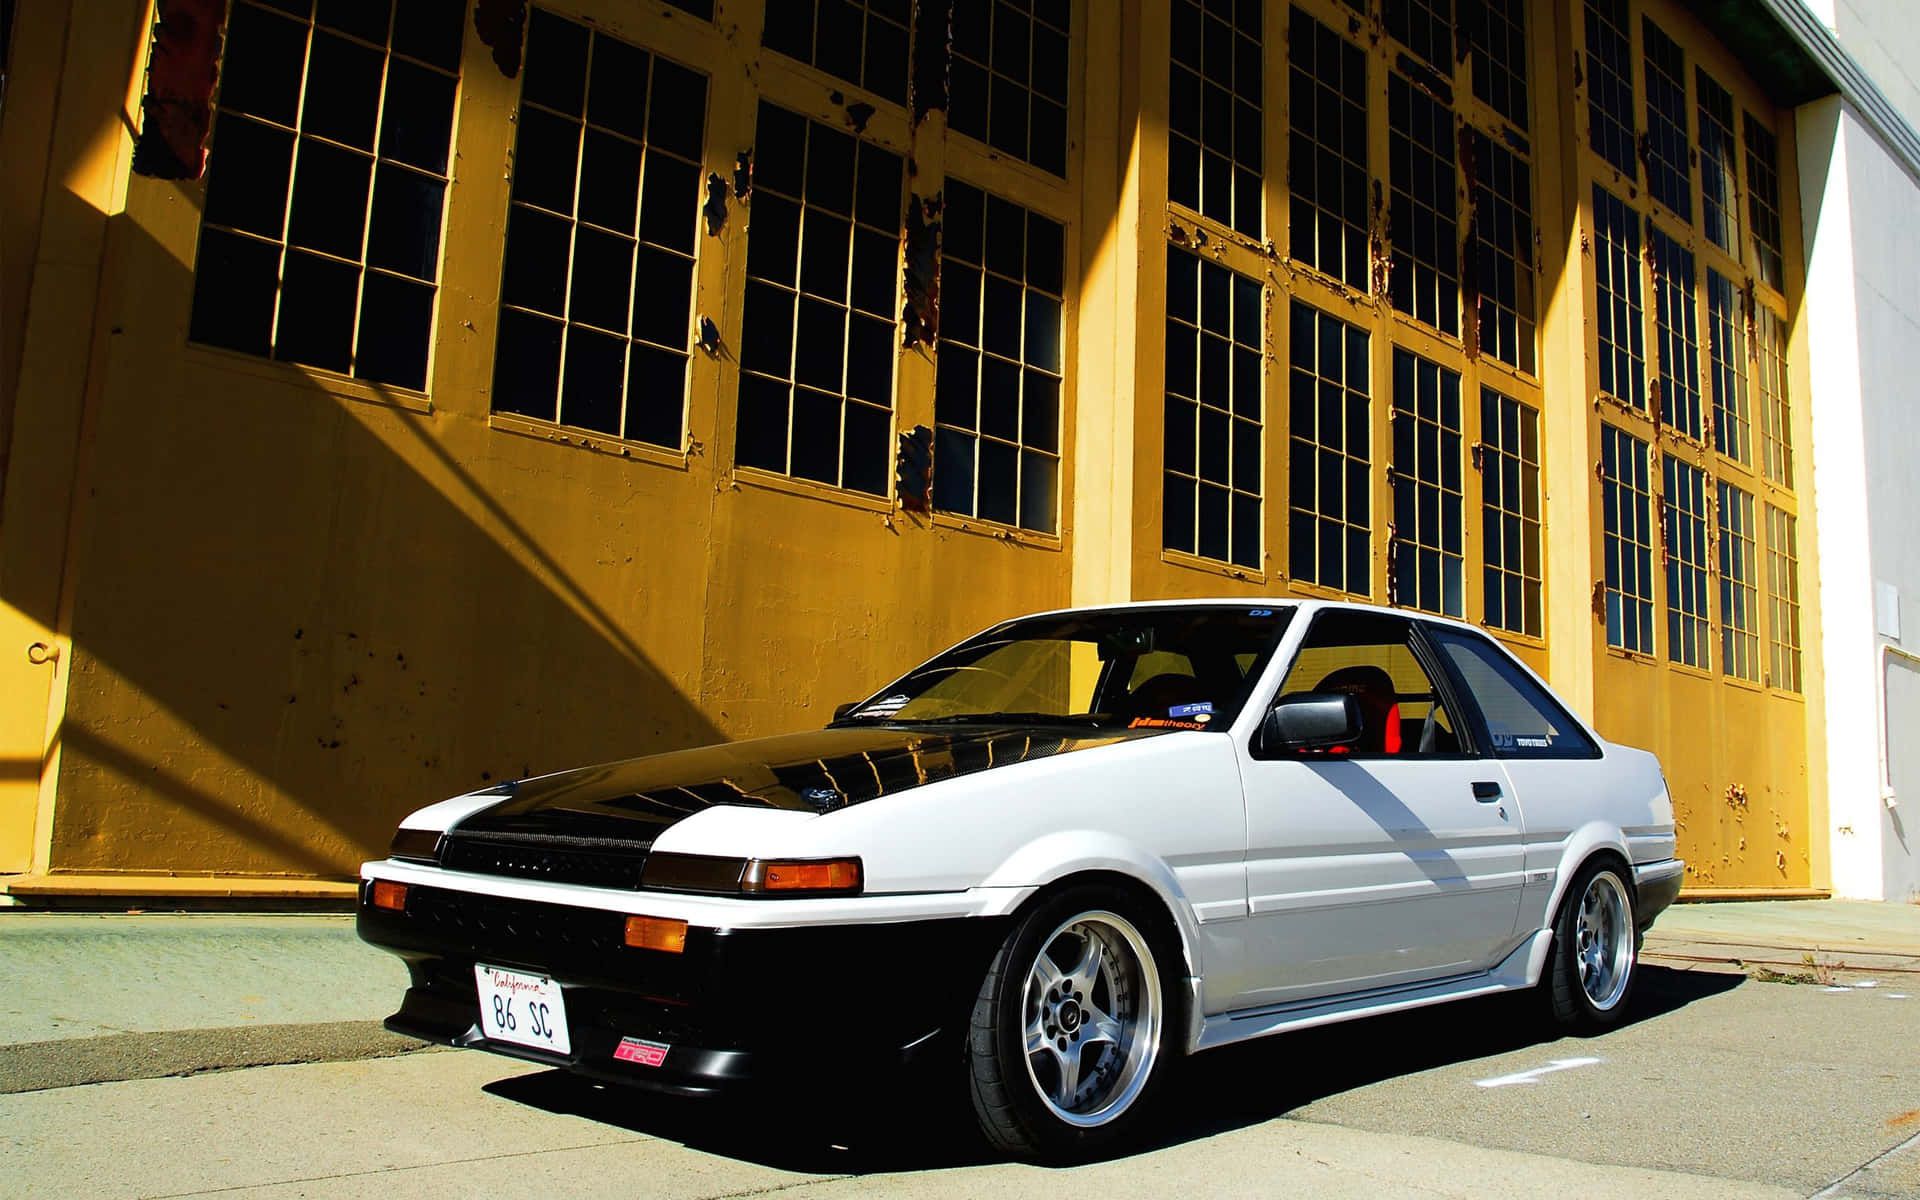 A car parked on the side of an empty street - Toyota AE86